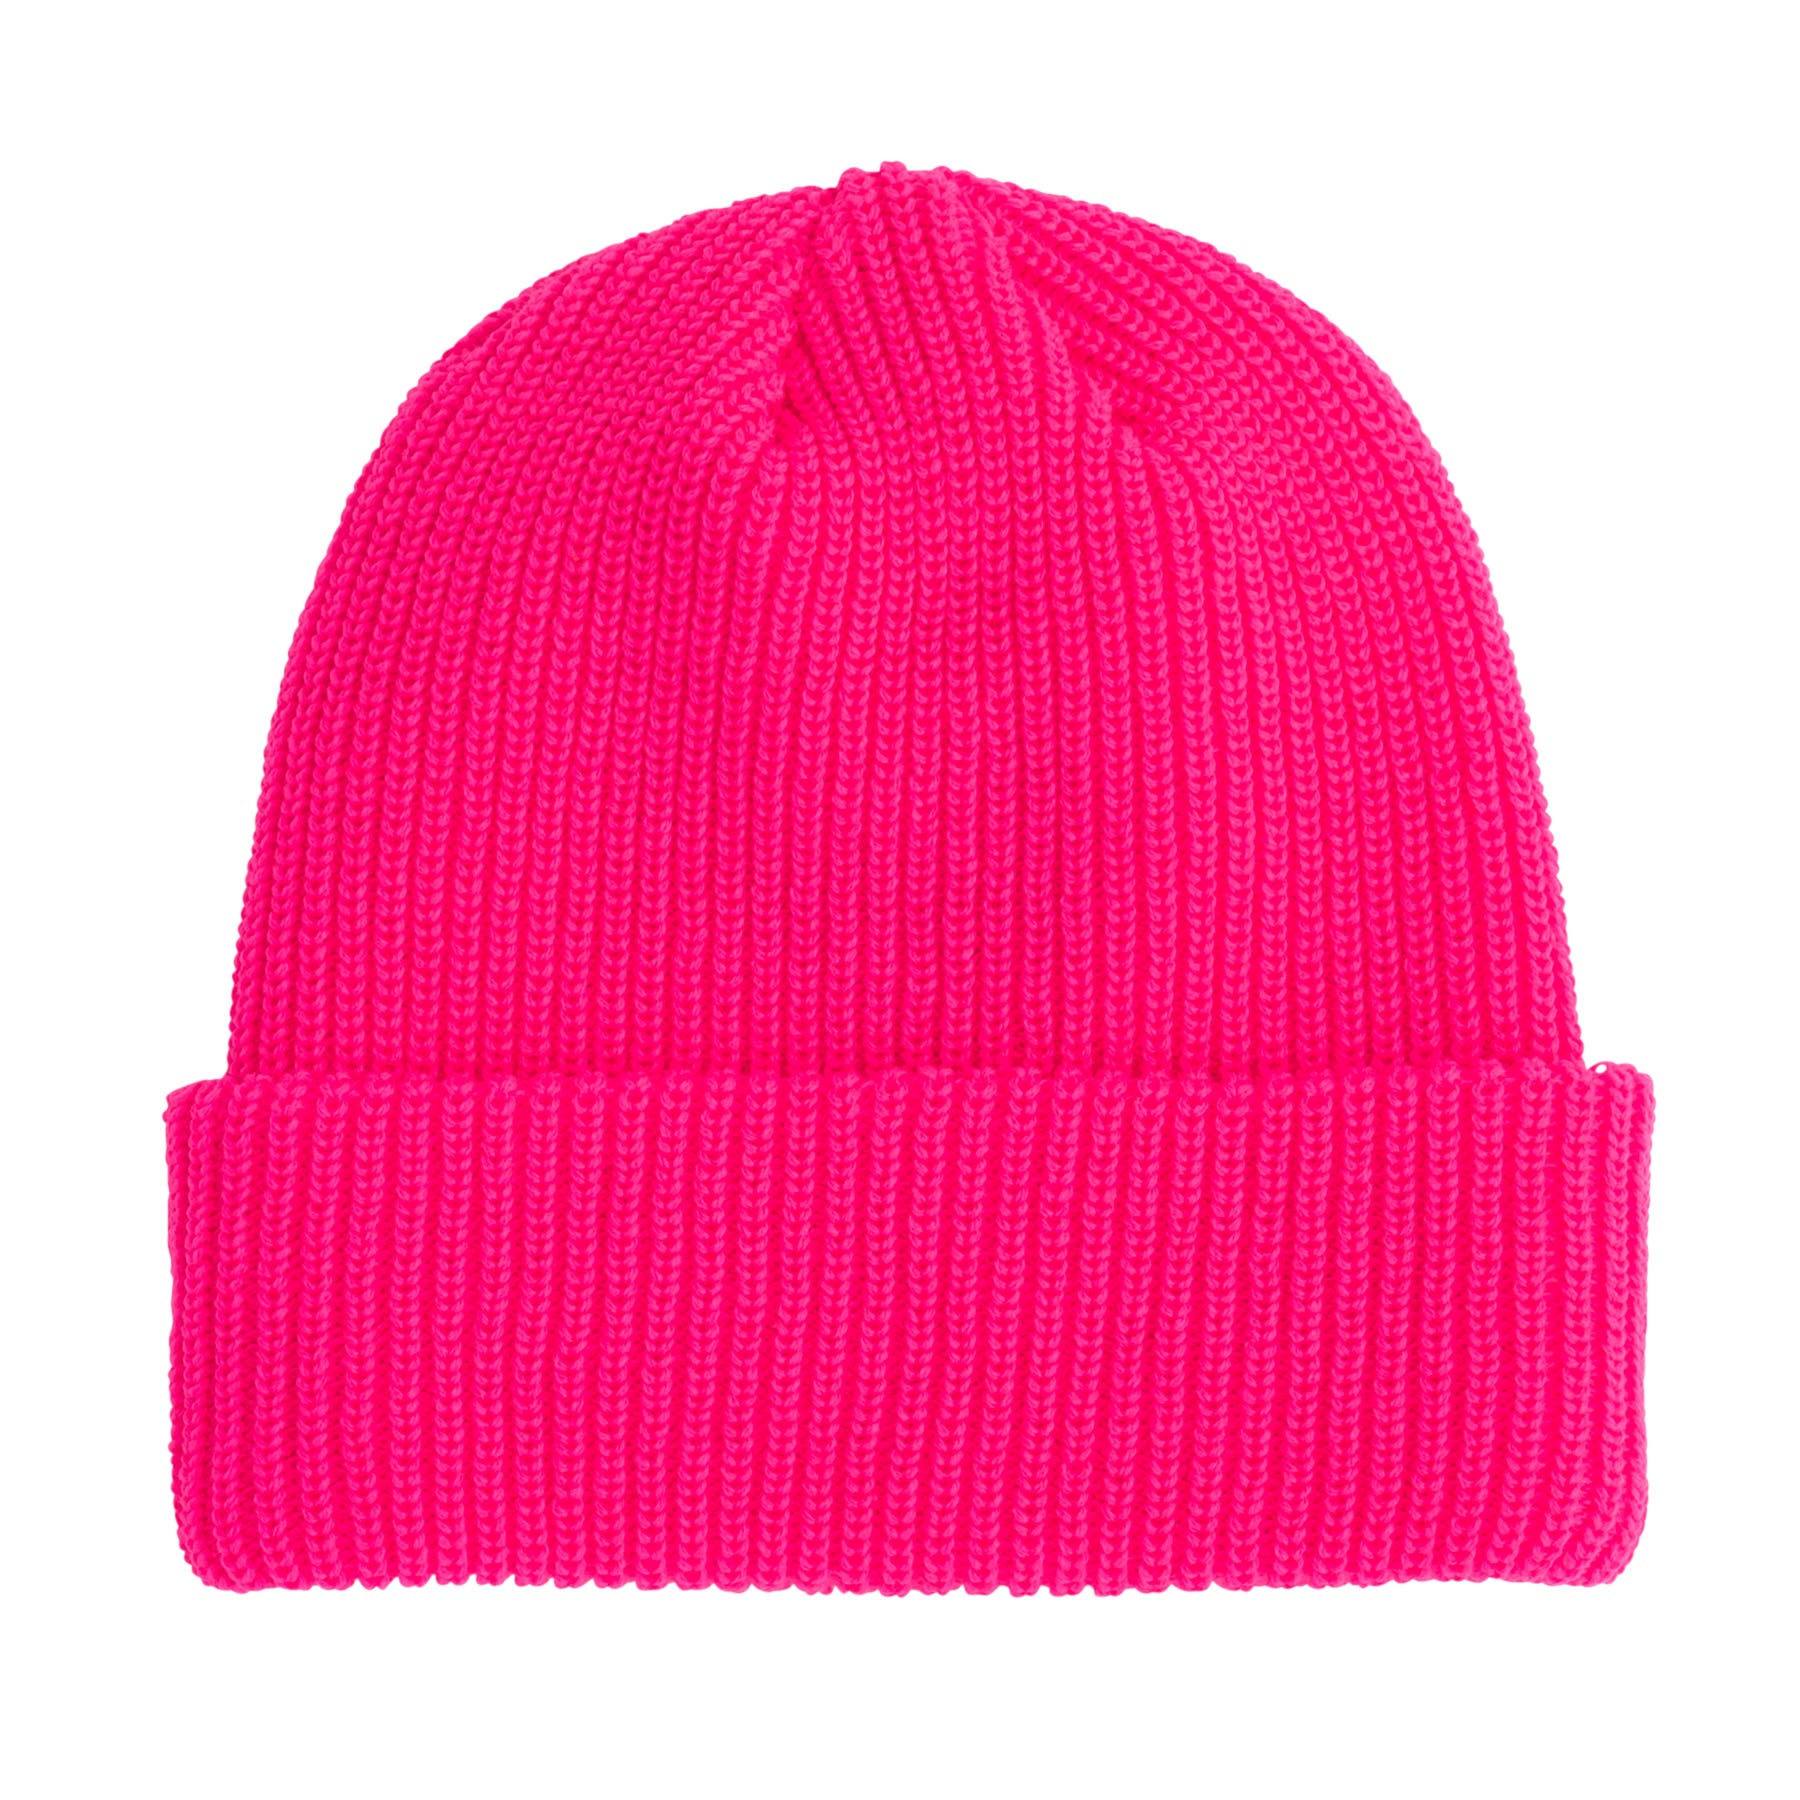 Slime Balls Oval Beanie Long Shoreman Hat Pink - Invisible Board Shop